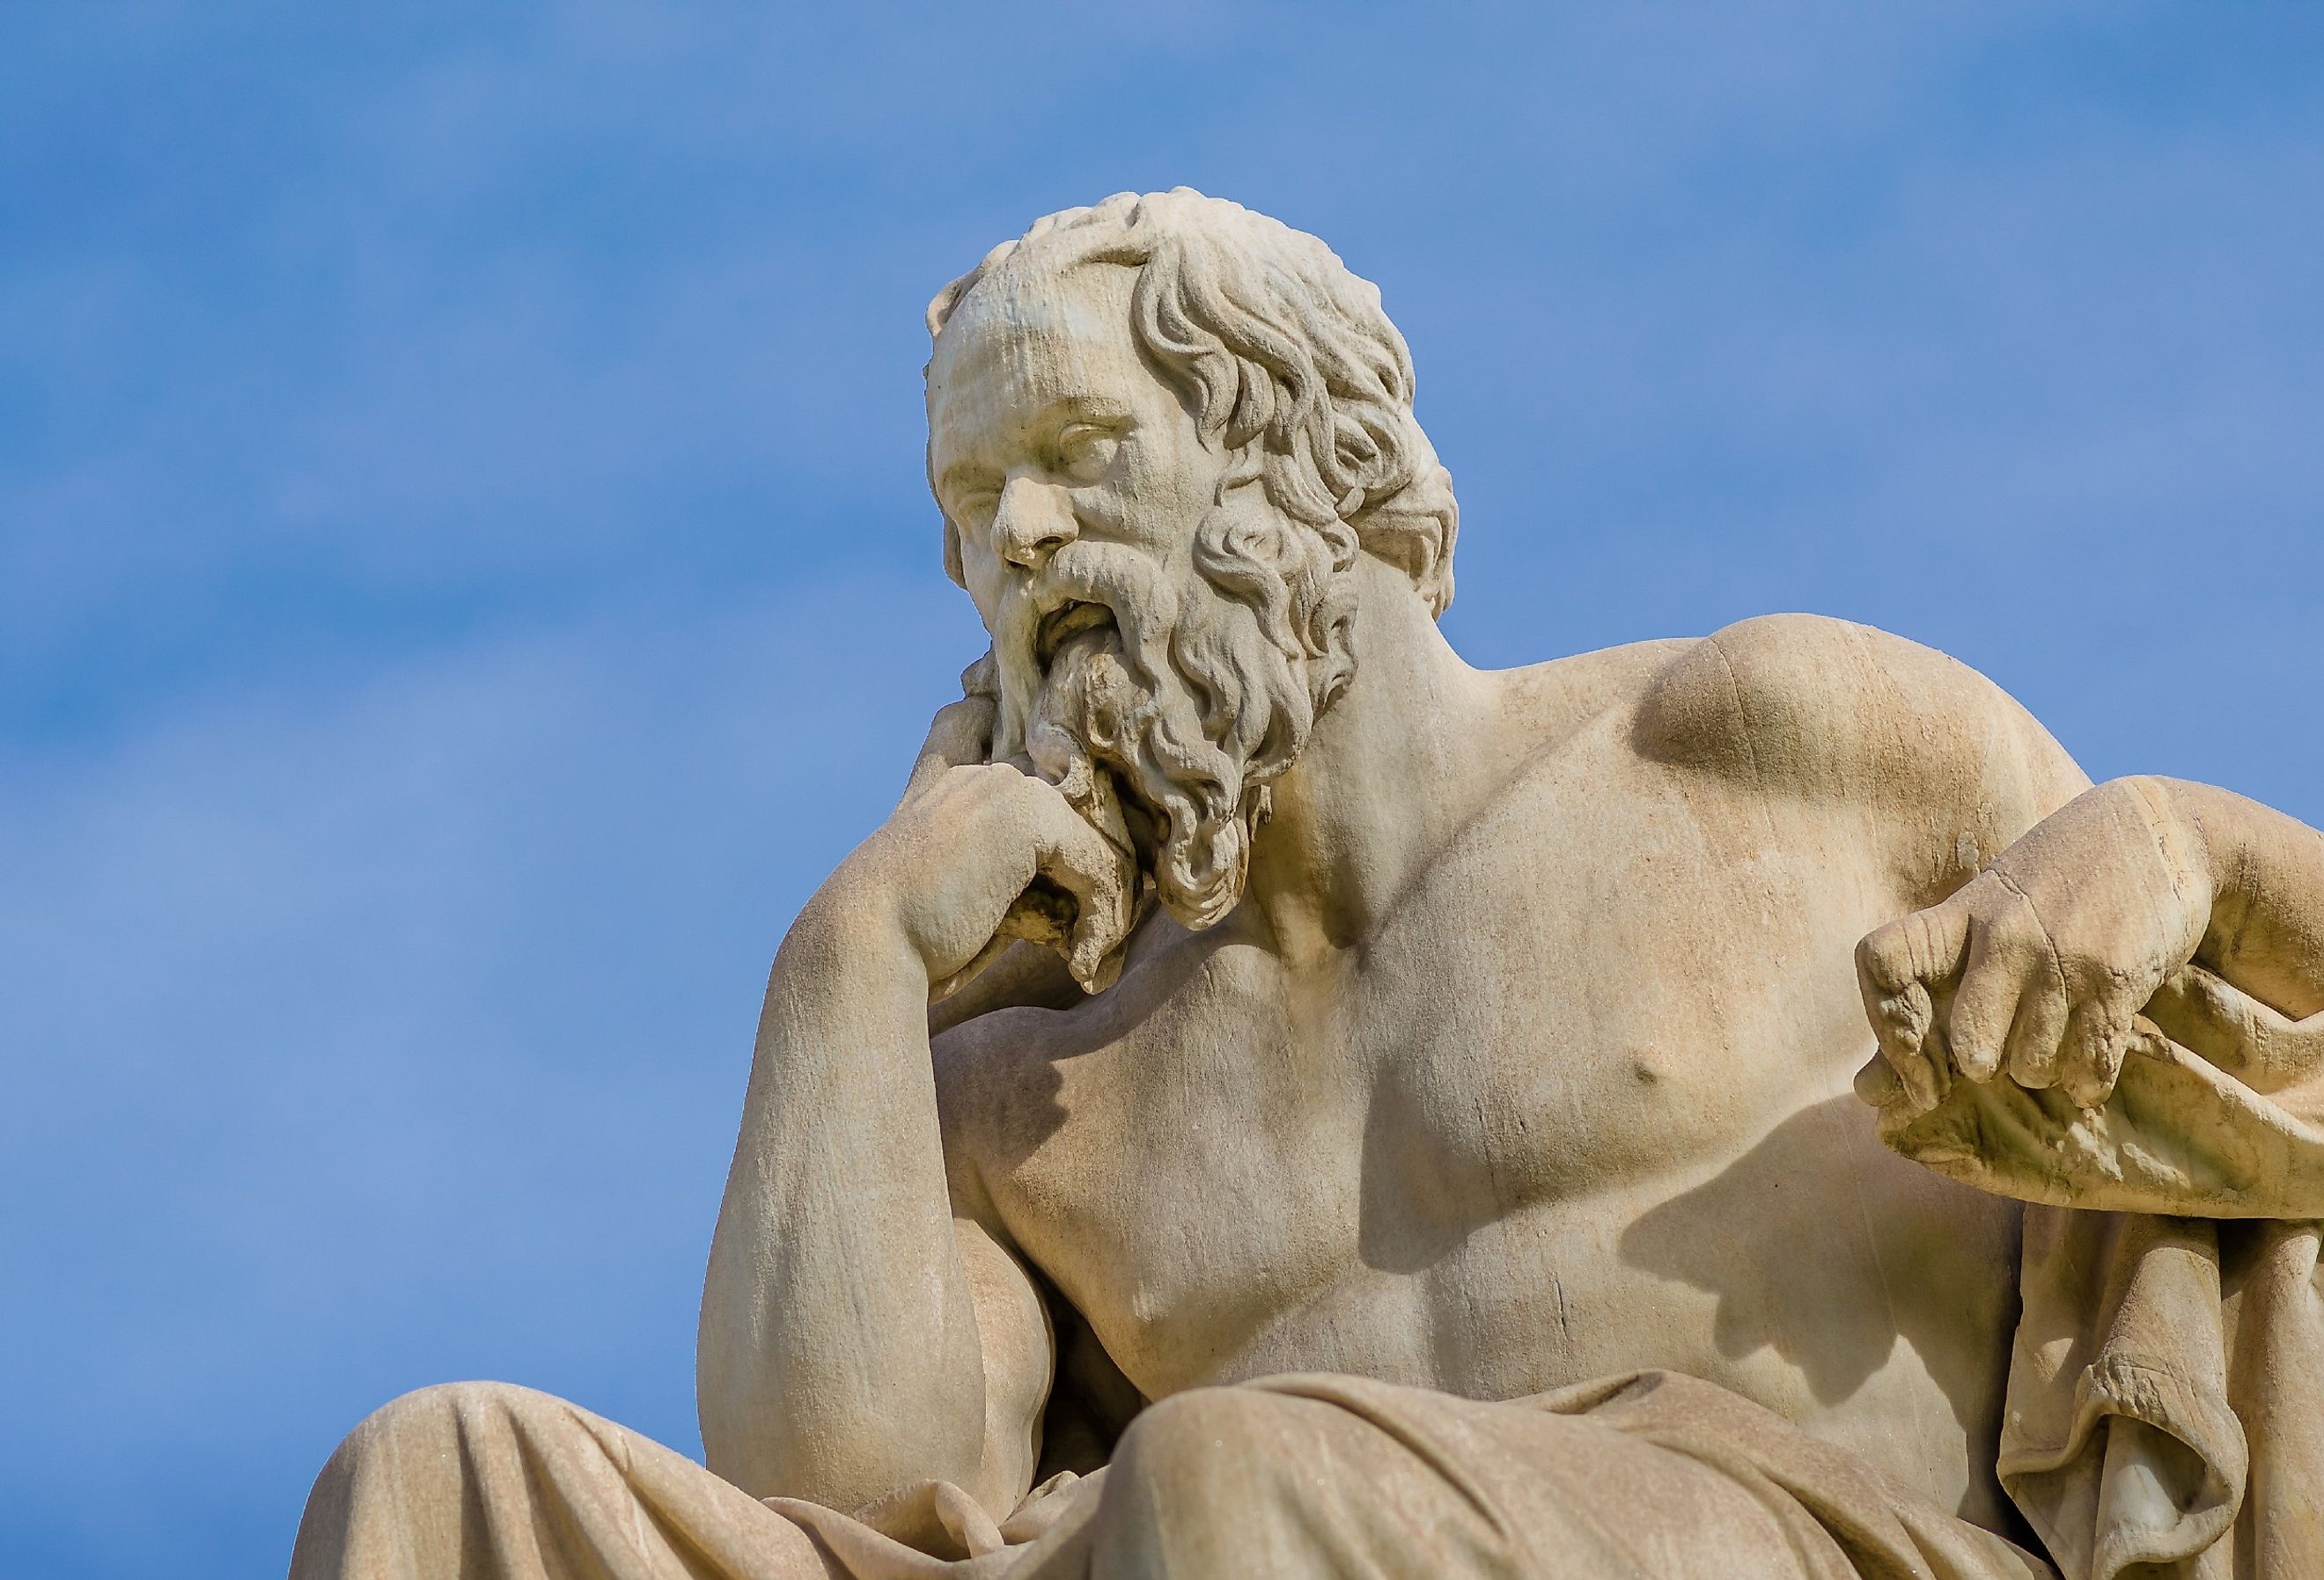 Close-up of Greece philosopher Socrates as he reflects on the meaning of life on the background of blue sky.